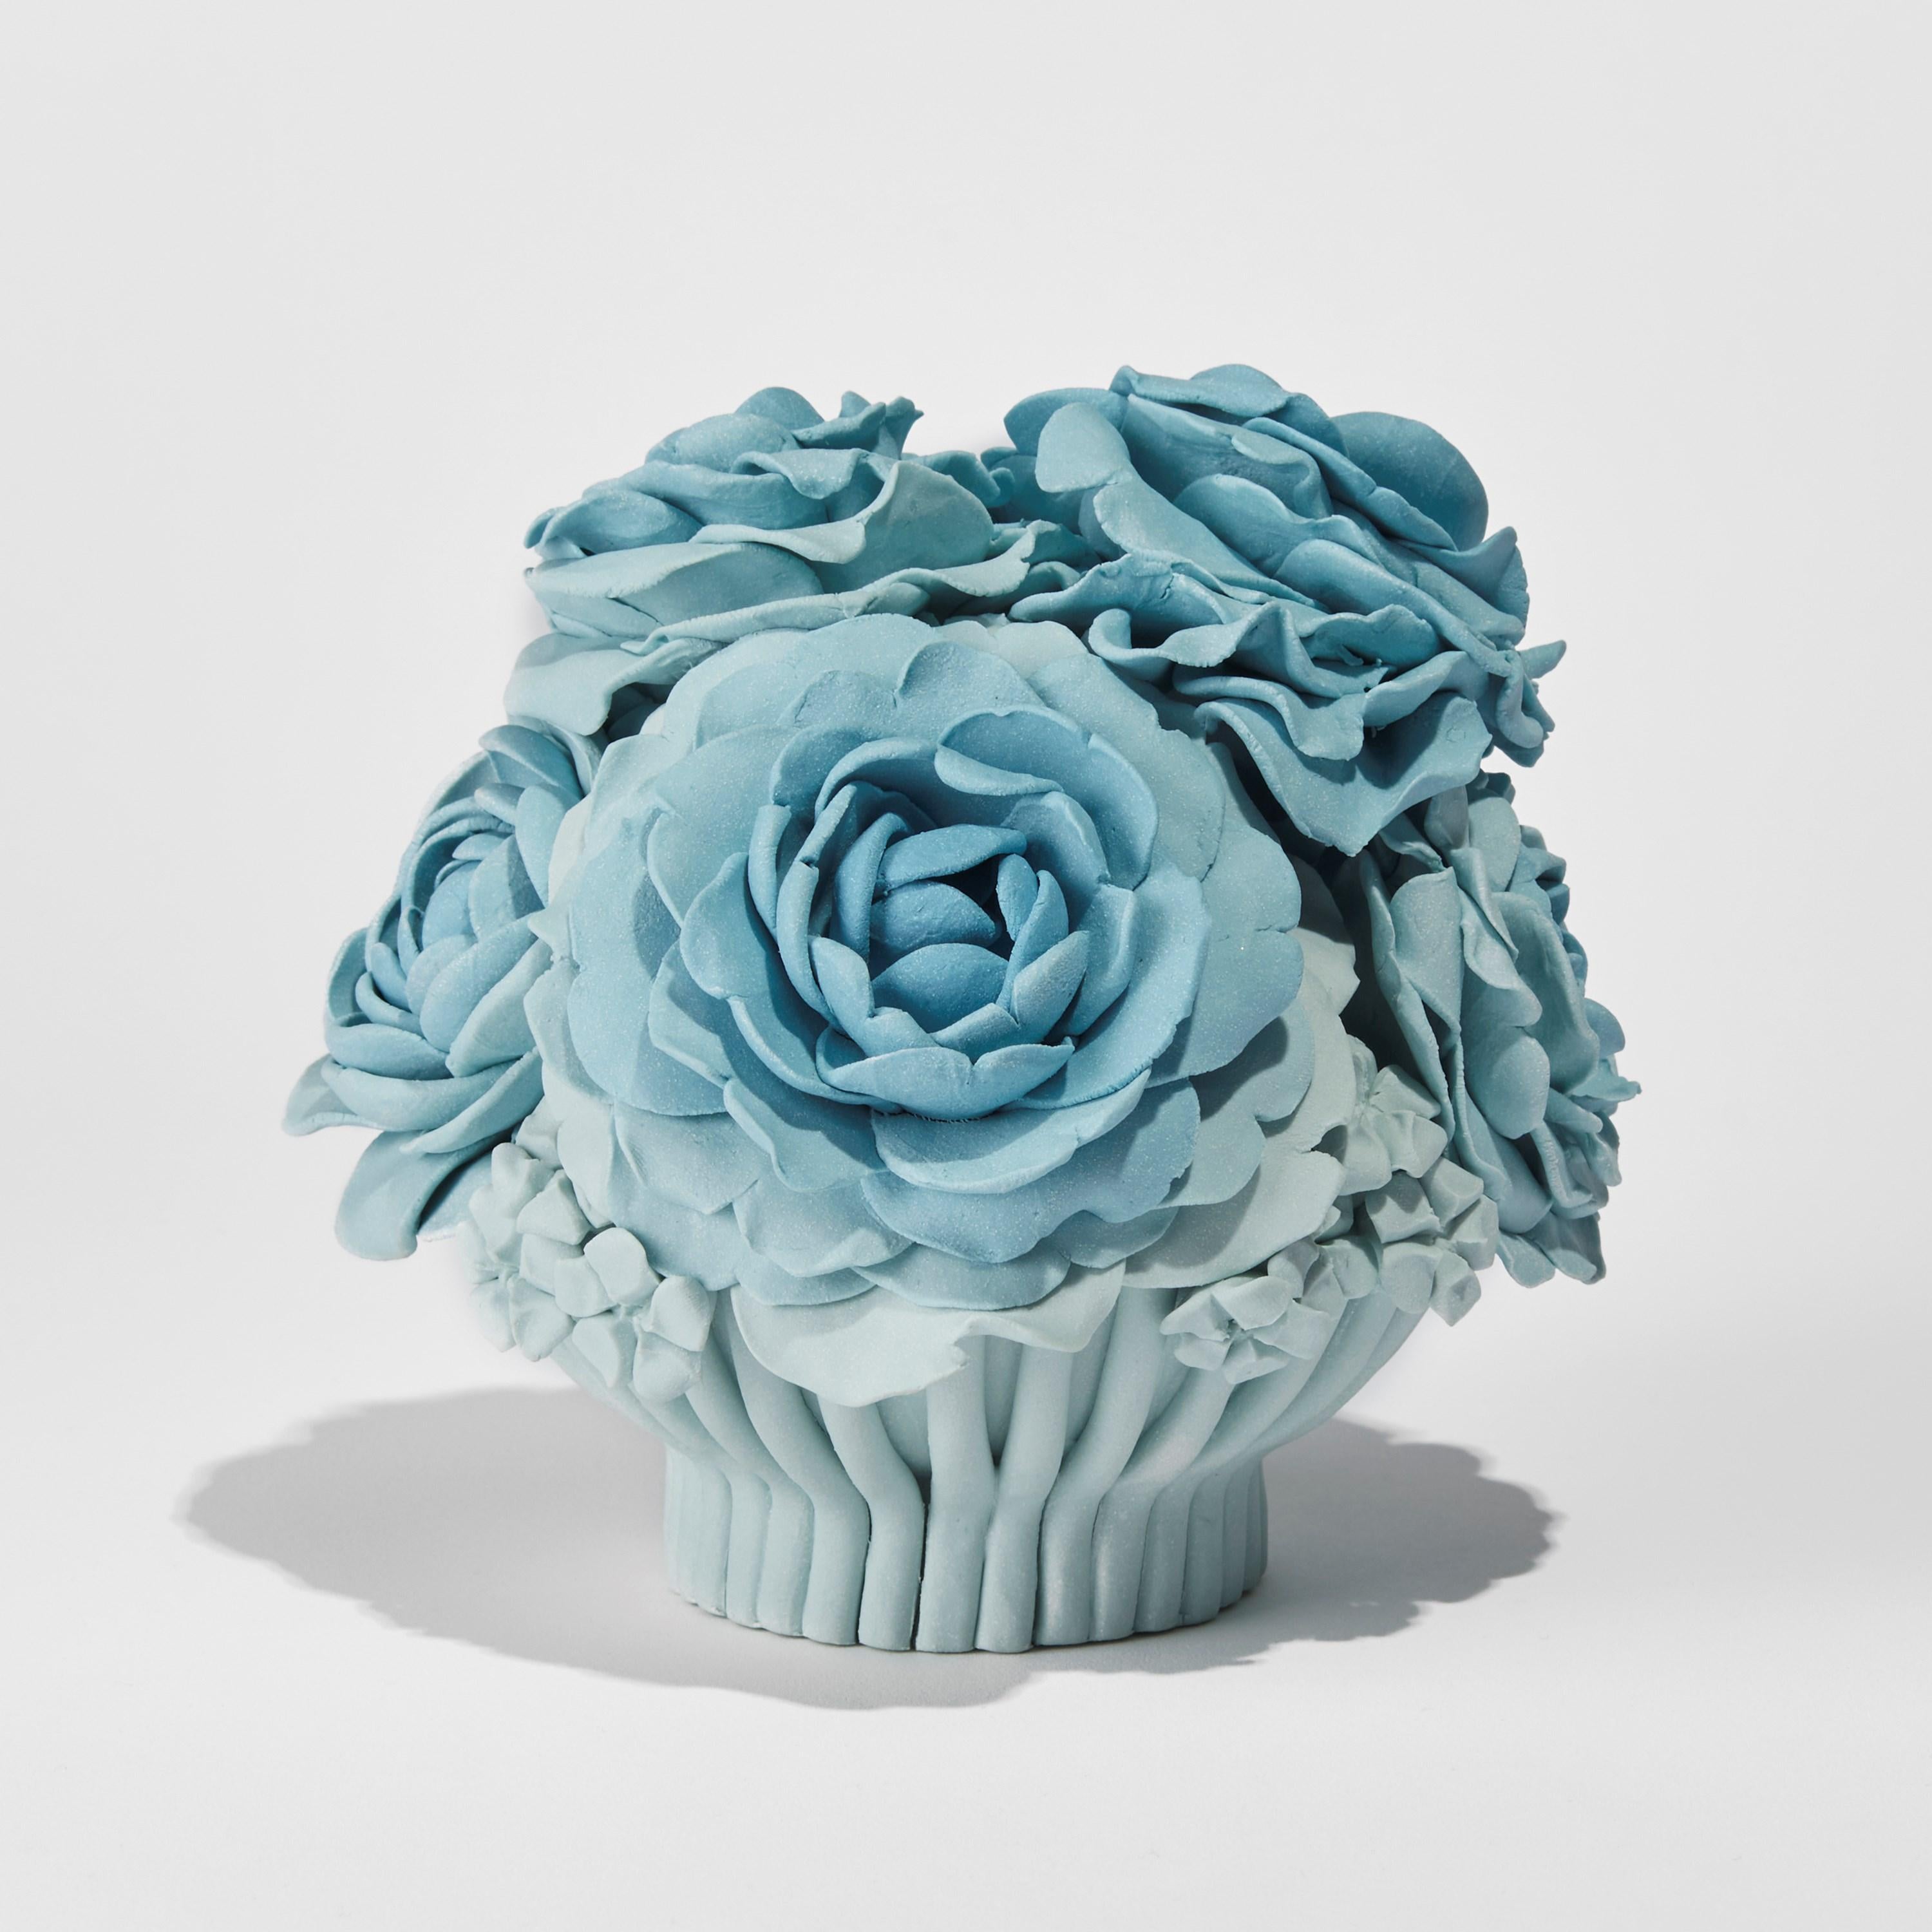 Joyce, is a unique handcrafted soft pastel blue porcelain sculpture and centrepiece completely covered in individually made porcelain flowers of all different shapes and forms by the British artist, Vanessa Hogge.

Vanessa Hogge breathes life into